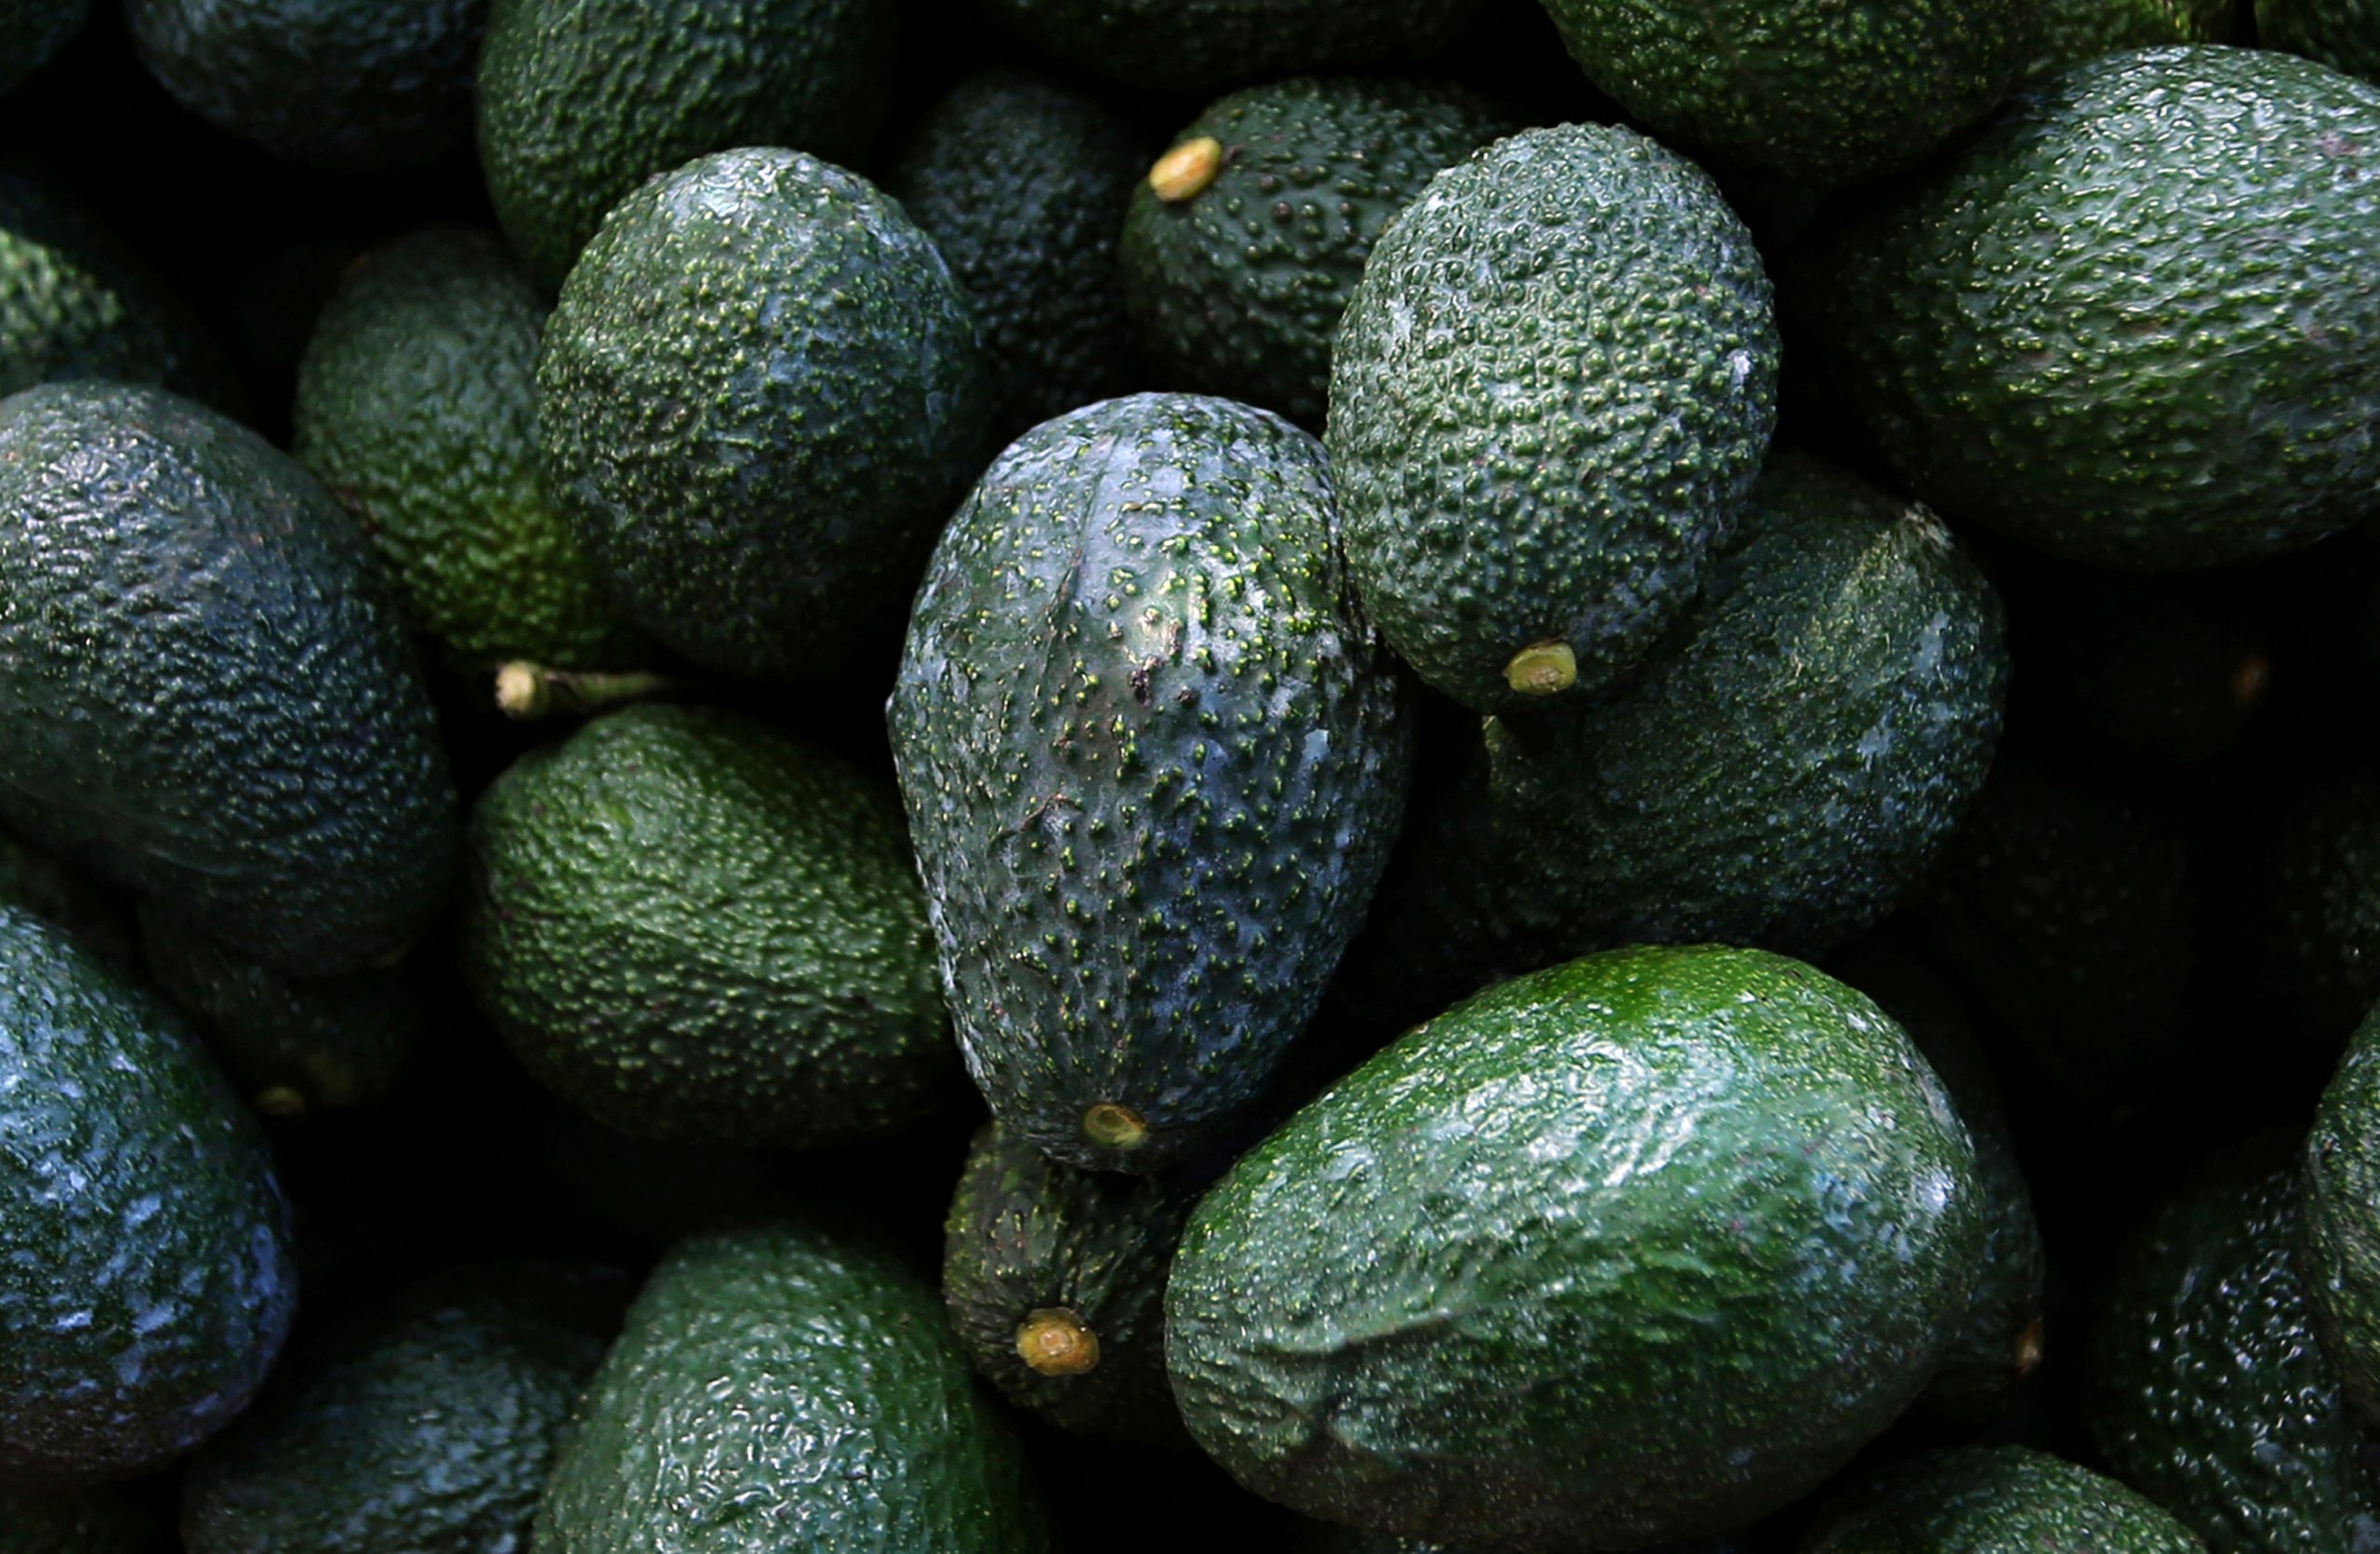 US suspends Mexican avocado imports on eve of Super Bowl